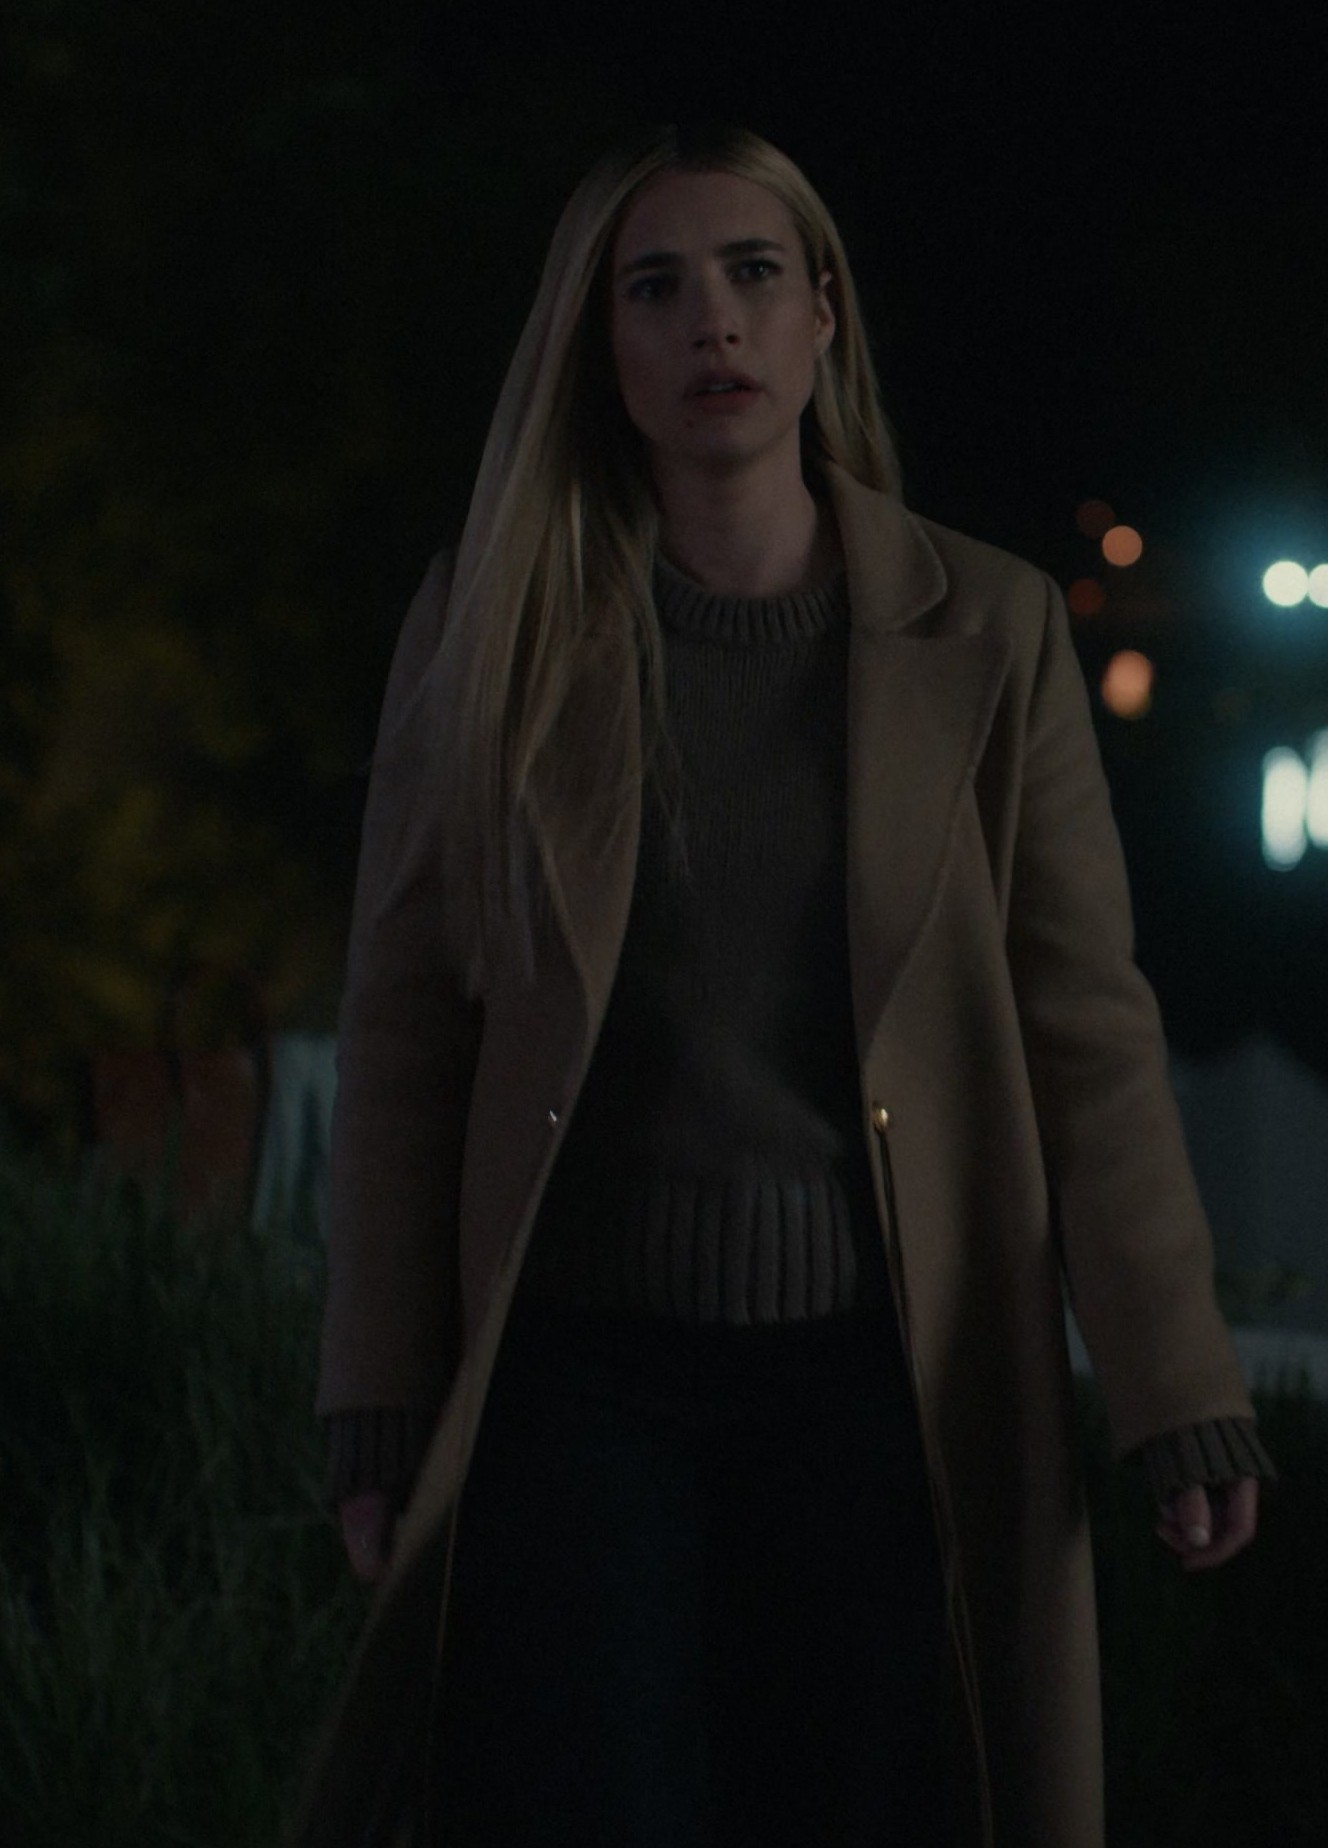 Worn on American Horror Story TV Show - Tailored Beige Overcoat with Gold Button Details Worn by Emma Roberts as Anna Victoria Alcott